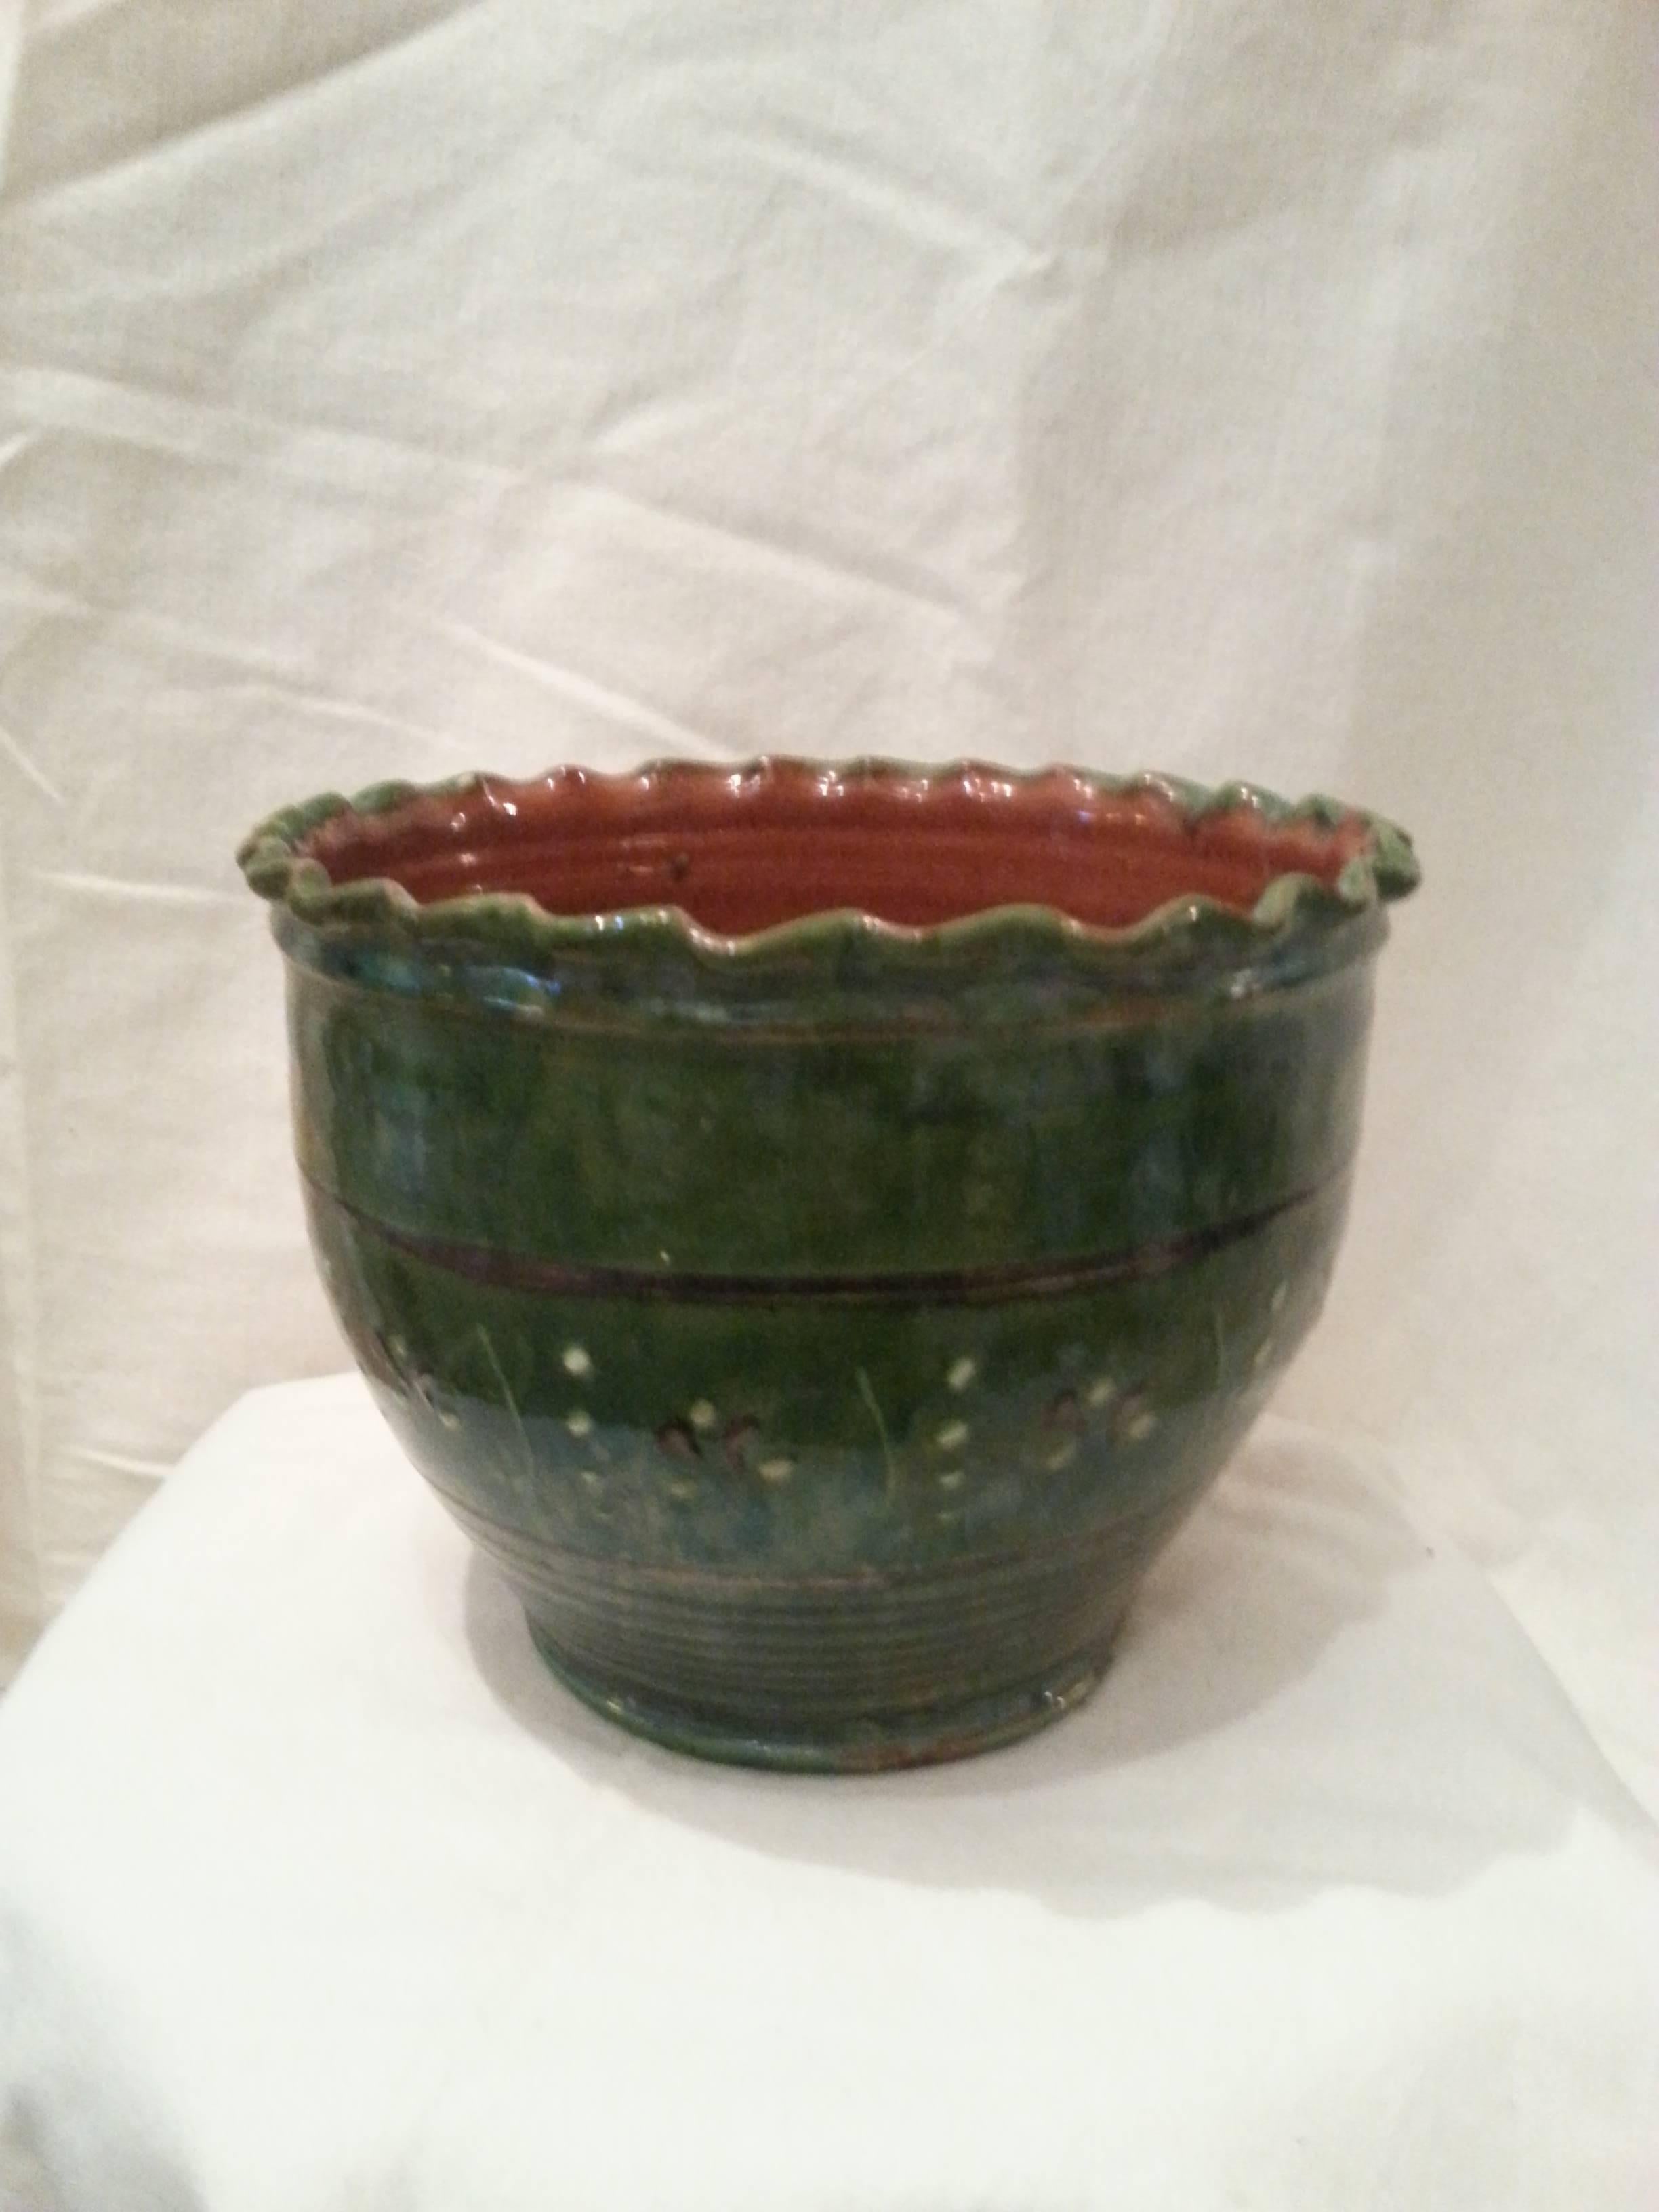 Green glazed Jardiniere. Scallop edge top. Small painted motif around. No drainage holes.